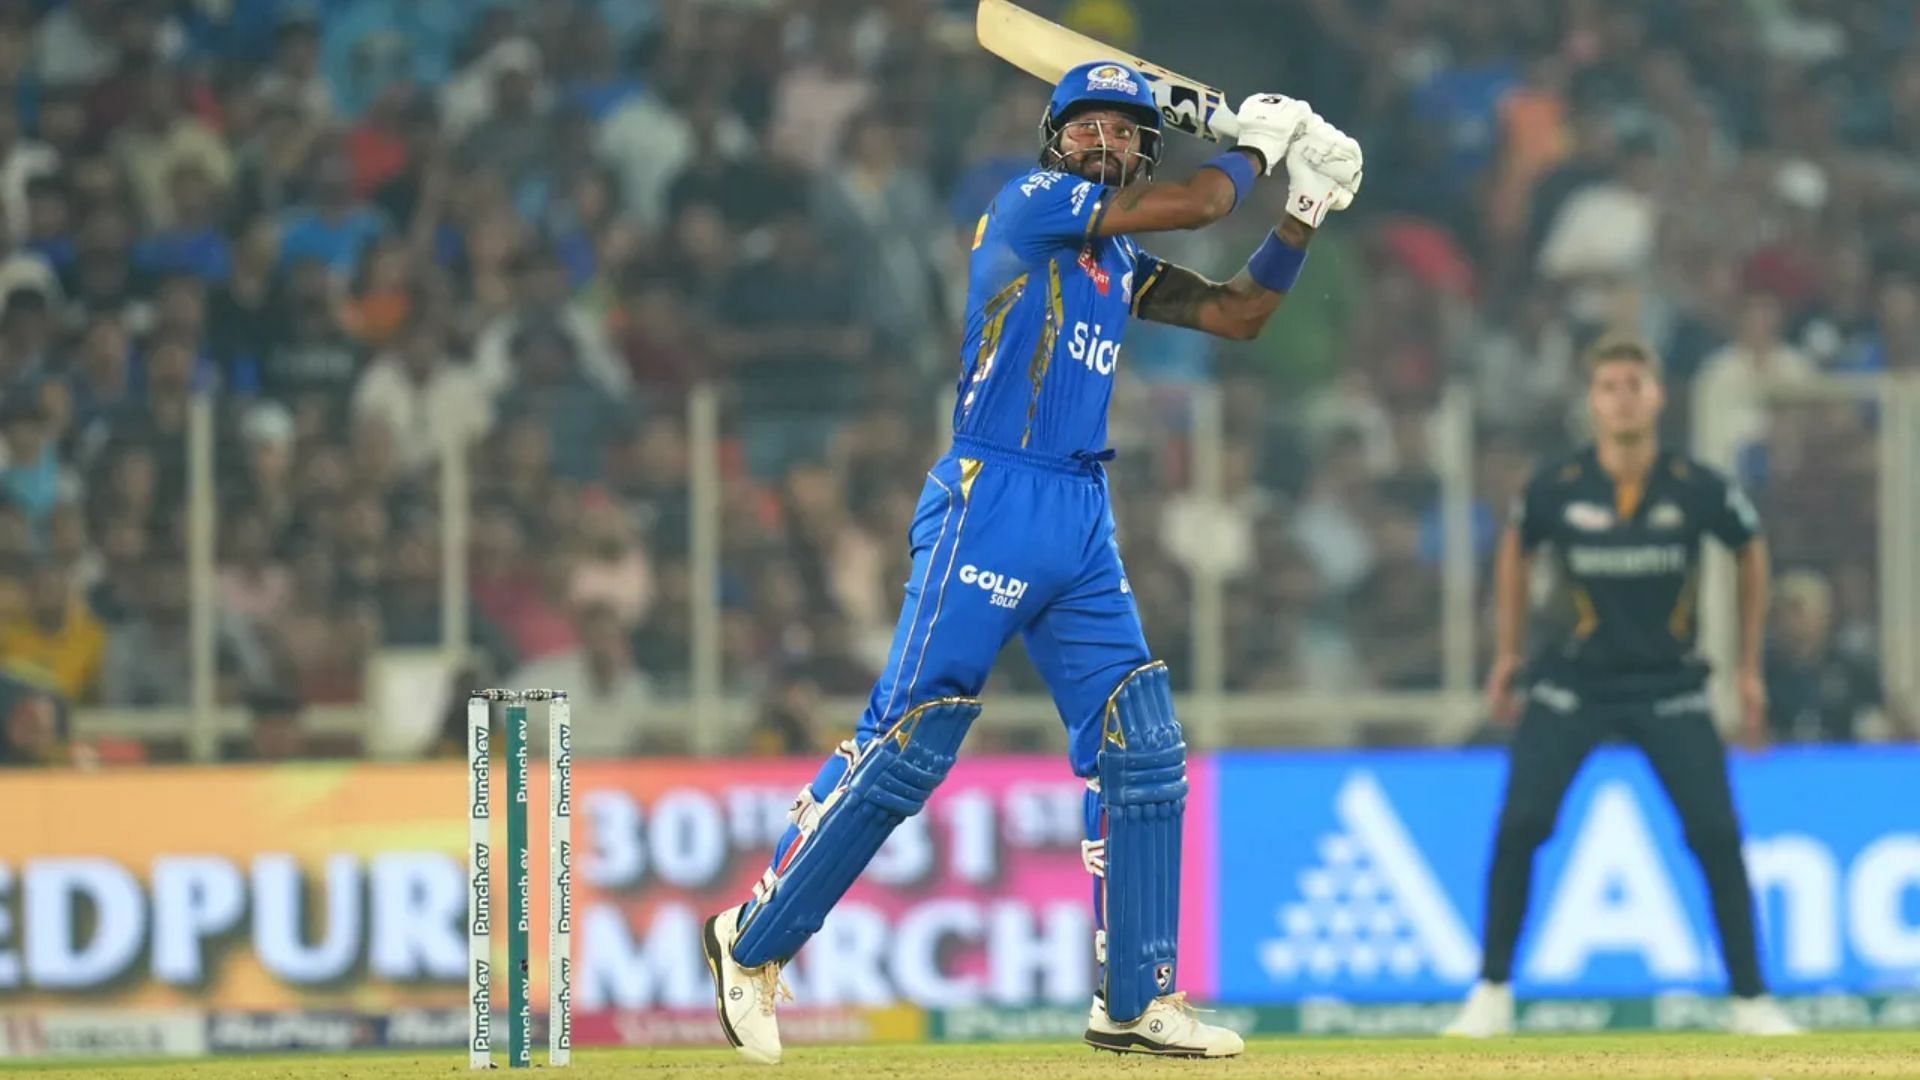 Hardik Pandya and co. have had some close losses that could have gone either way